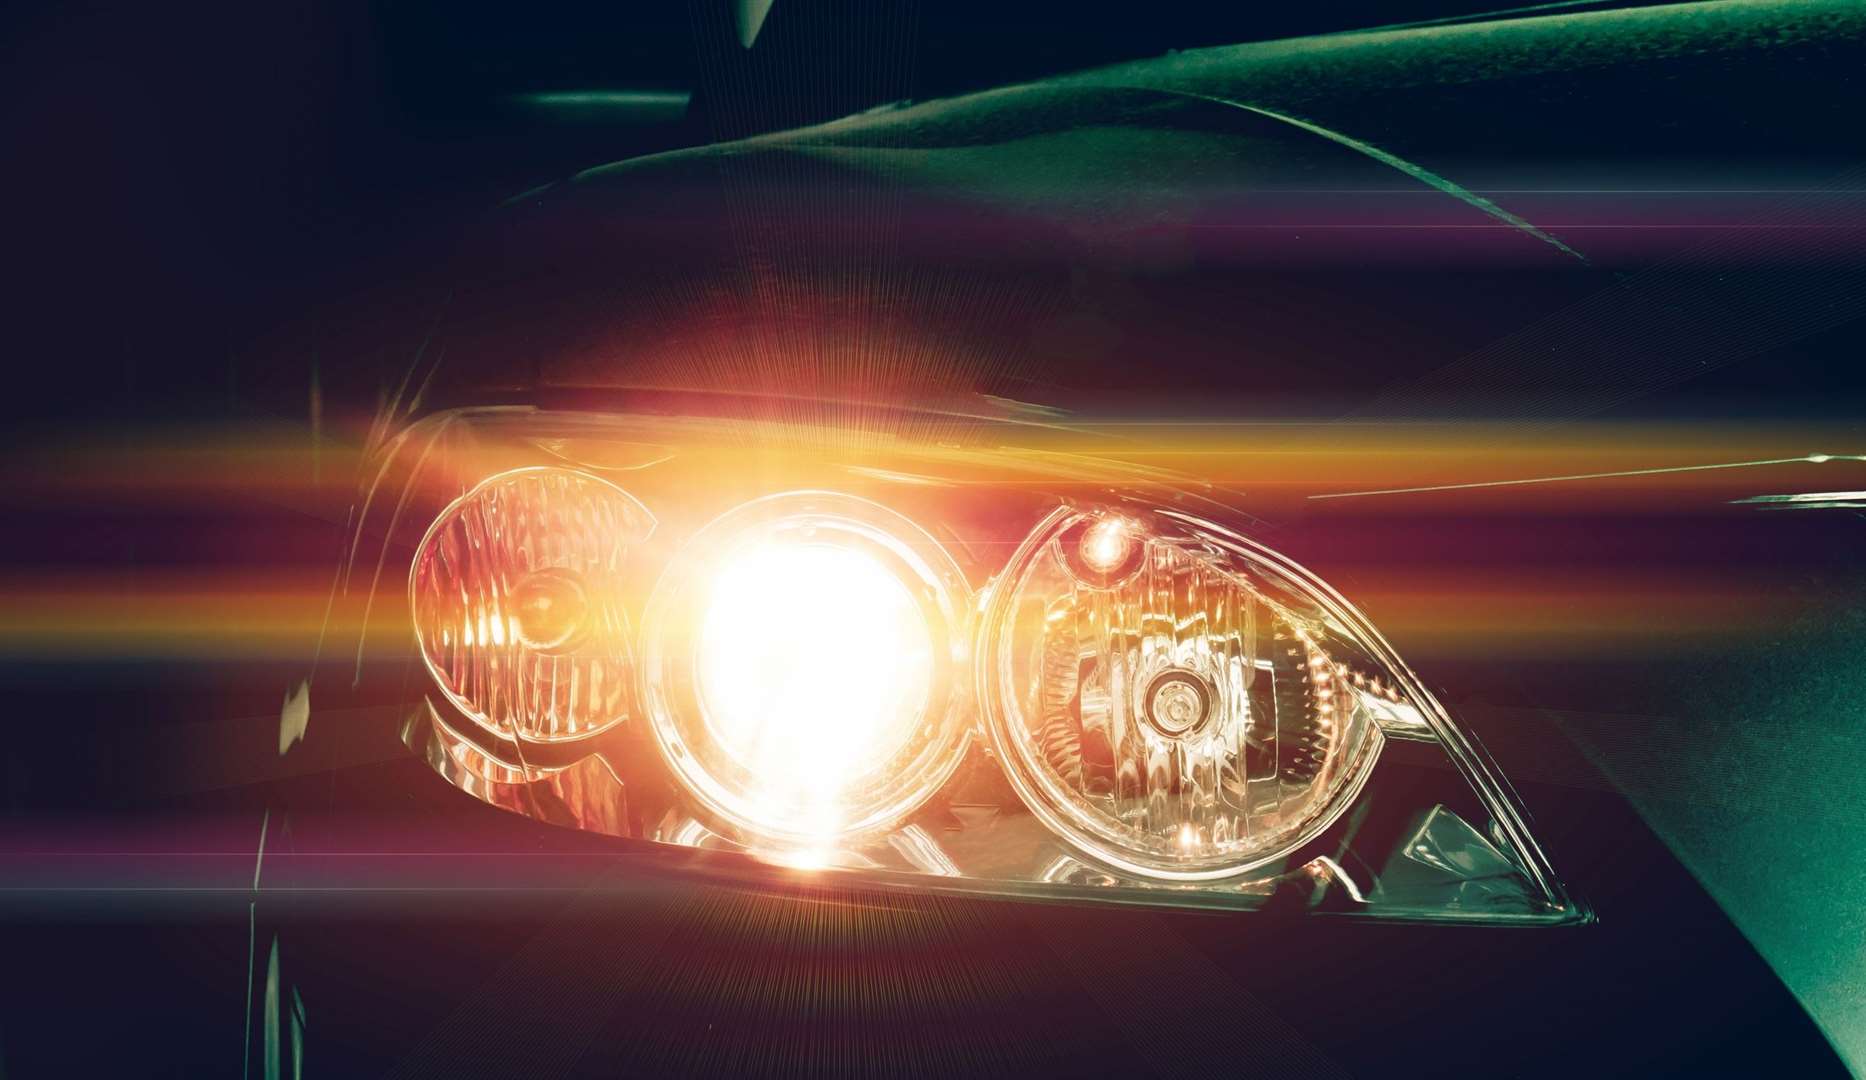 The RAC has raised concerns for a number of years about the increasing glare of headlights. Image: iStock.